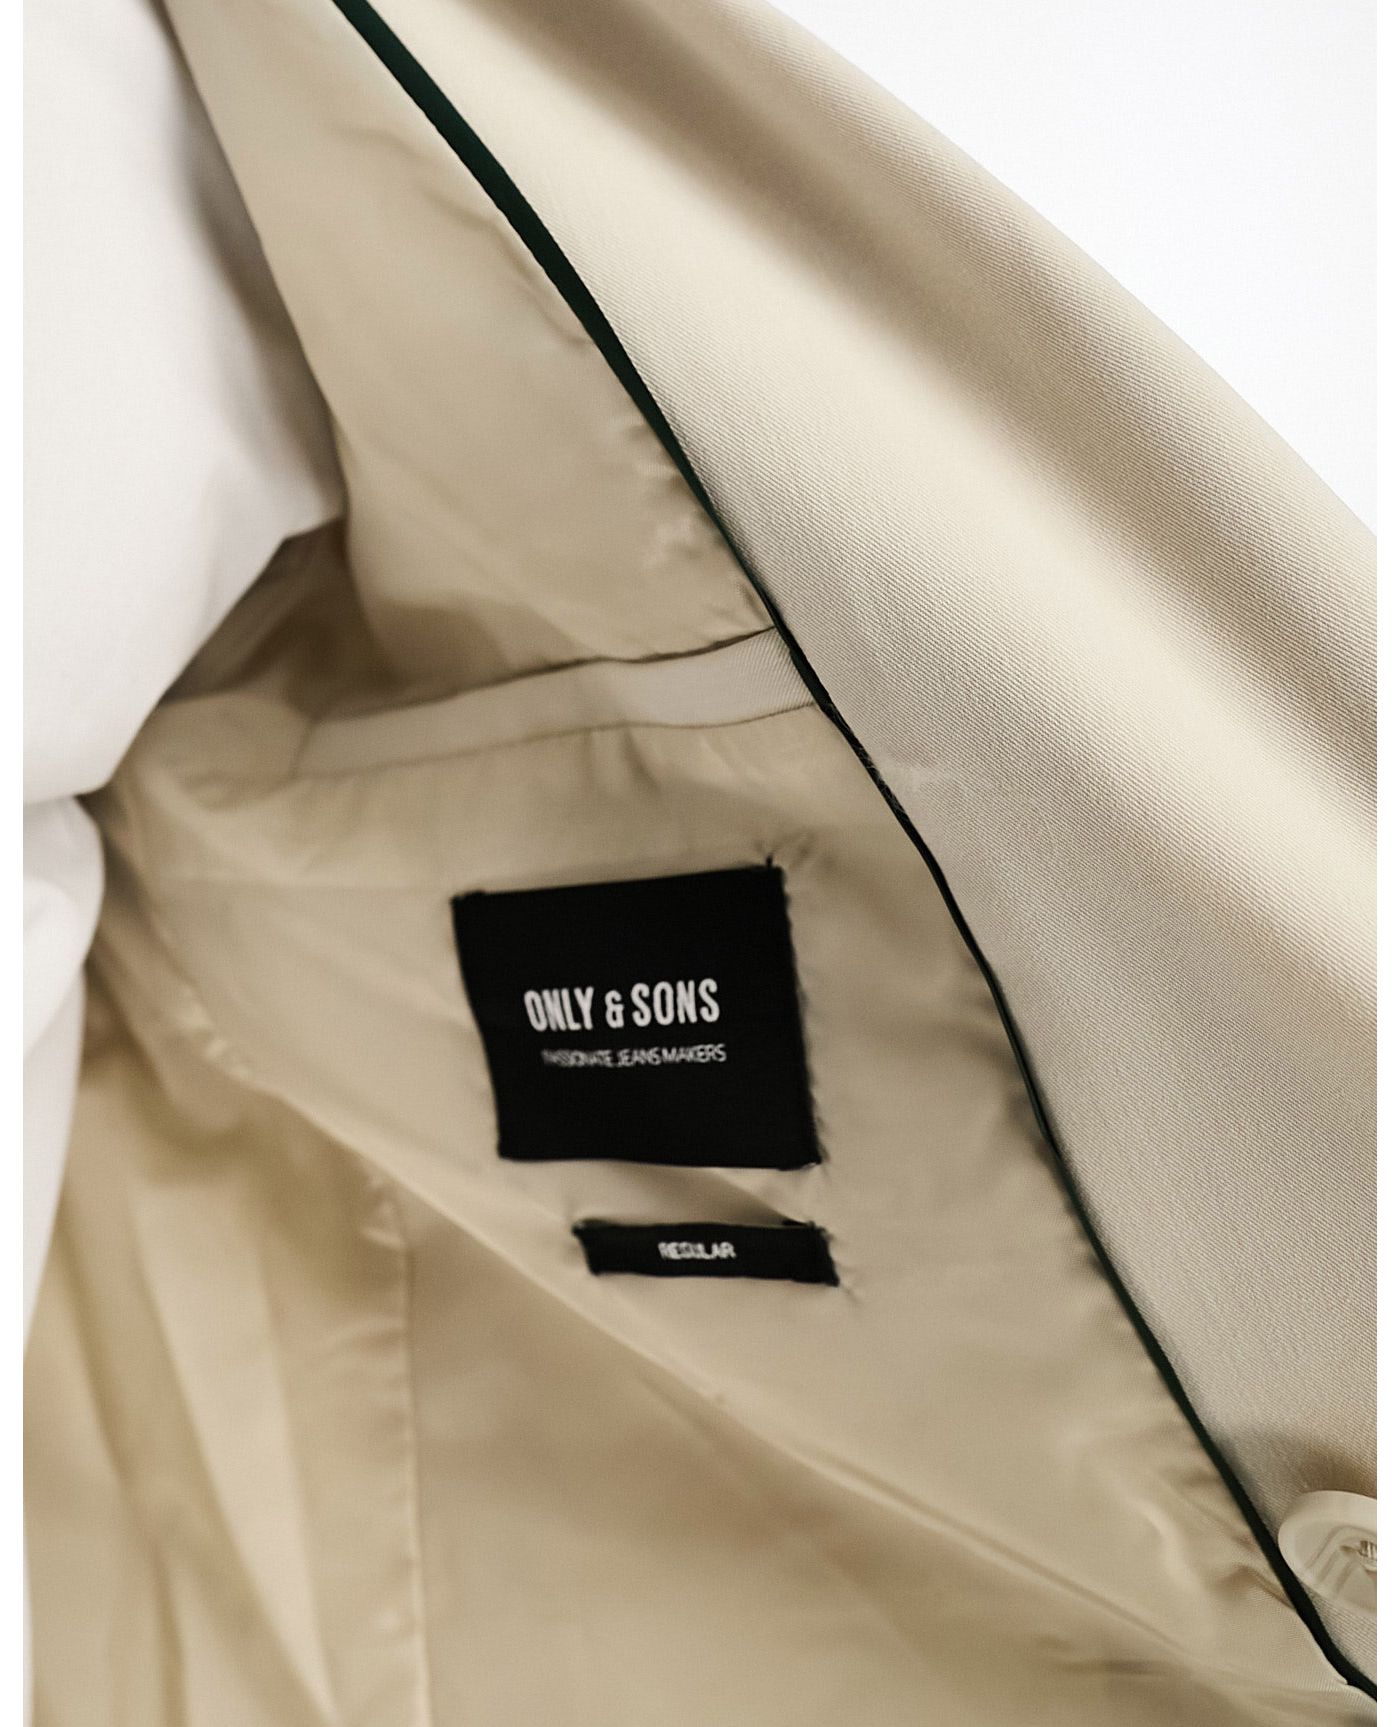 Only & Sons double breasted suit jacket in beige